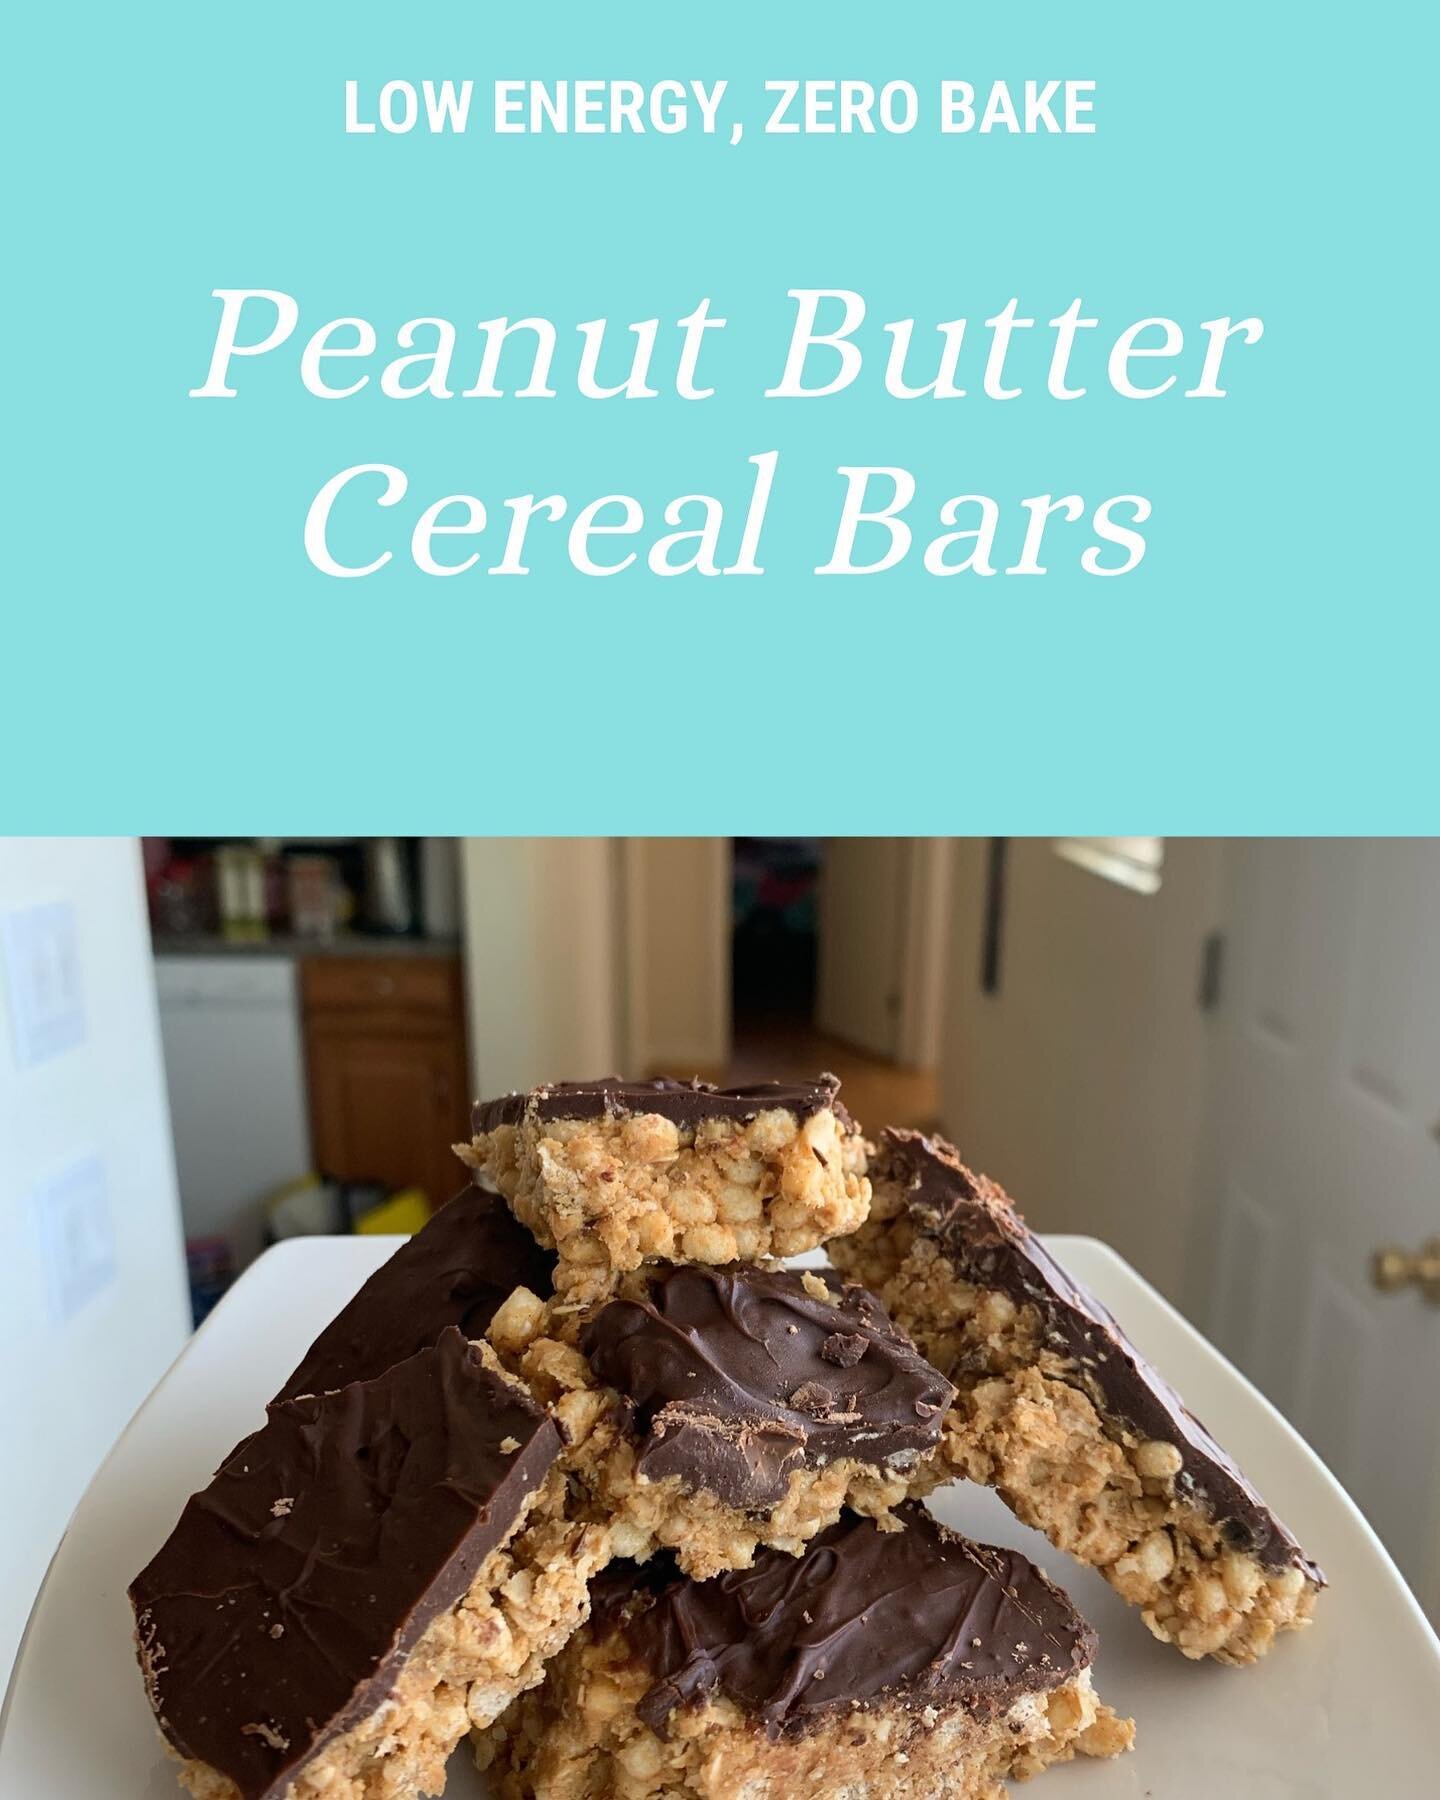 Inspired by Earth Day, we learned about reducing our &quot;food print&quot; through the use of an environmentally-friendly grain like oats in our Low Energy, Zero Bake Peanut Butter Cereal Bars! 🥜 Your food print measures the environmental impacts, 